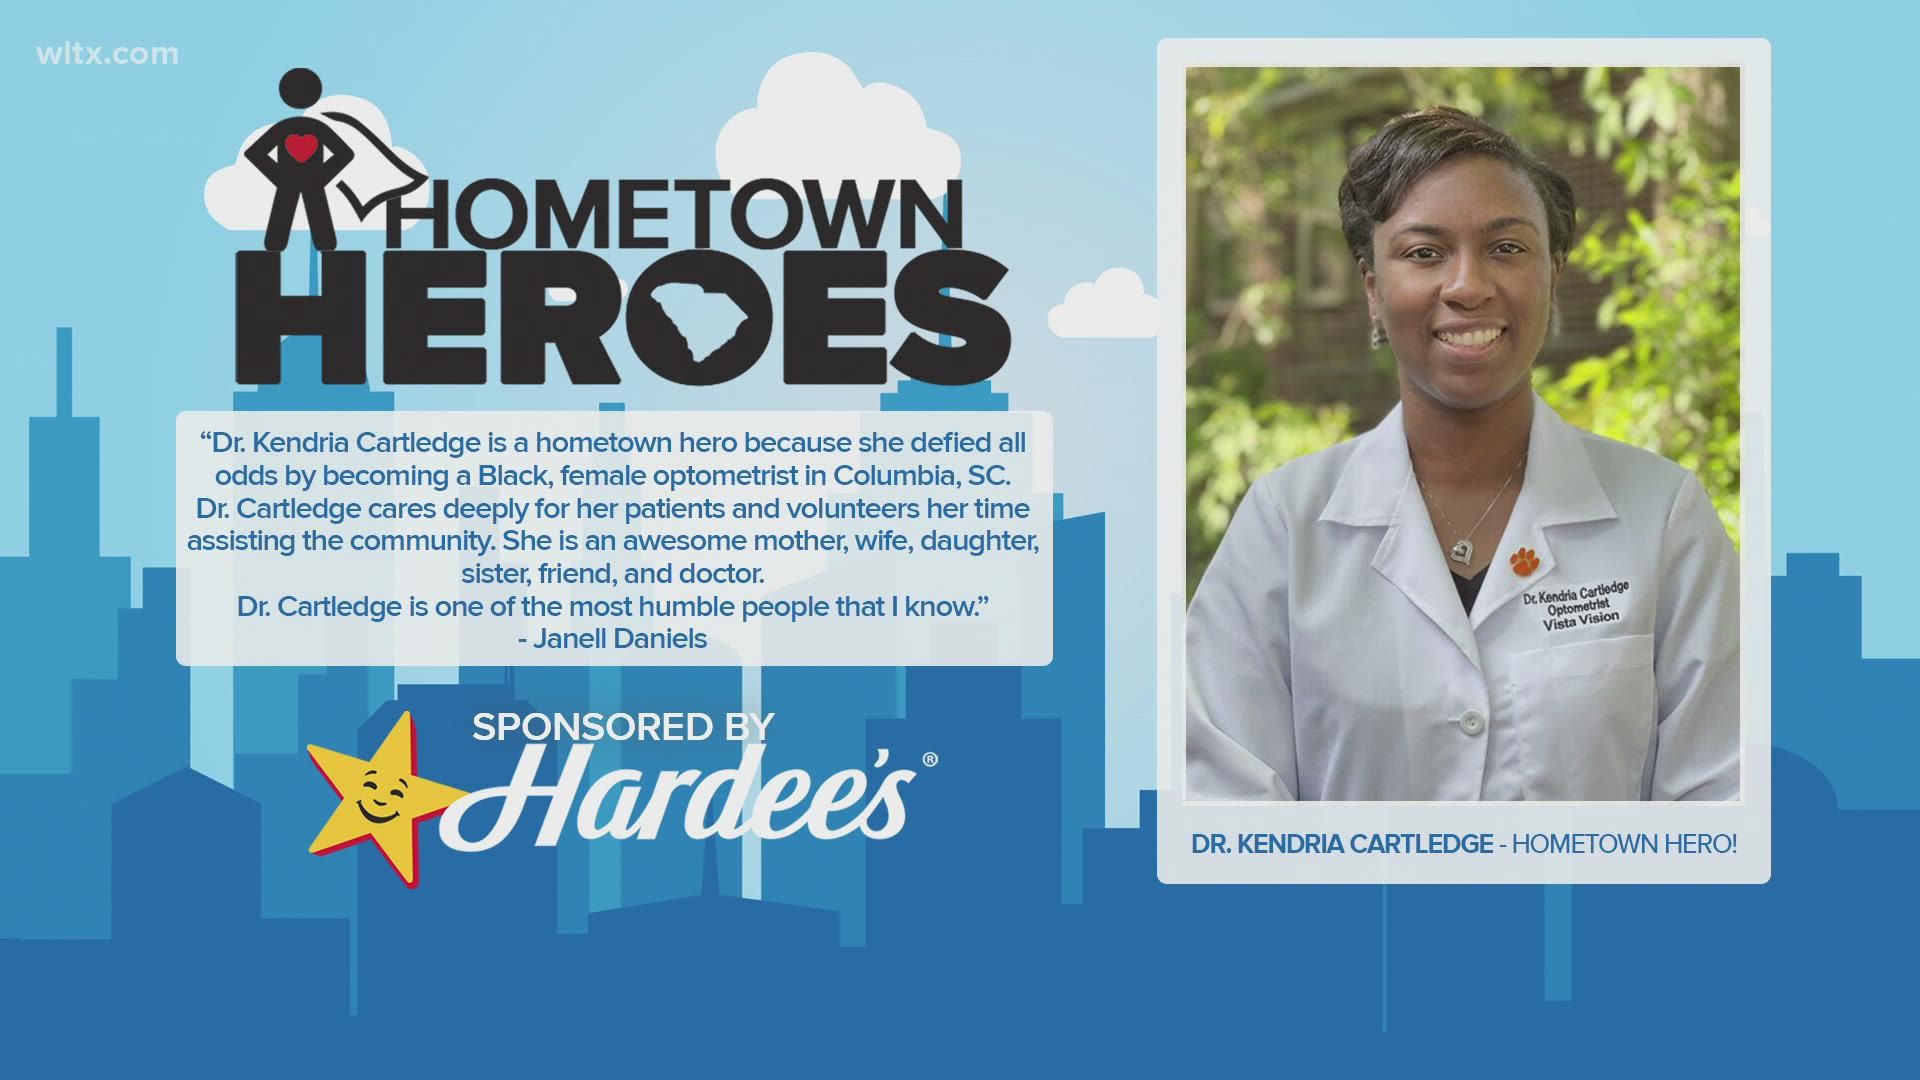 Dr. Kendria Cartledge cares deeply for her patients and volunteers her time assisting the community.